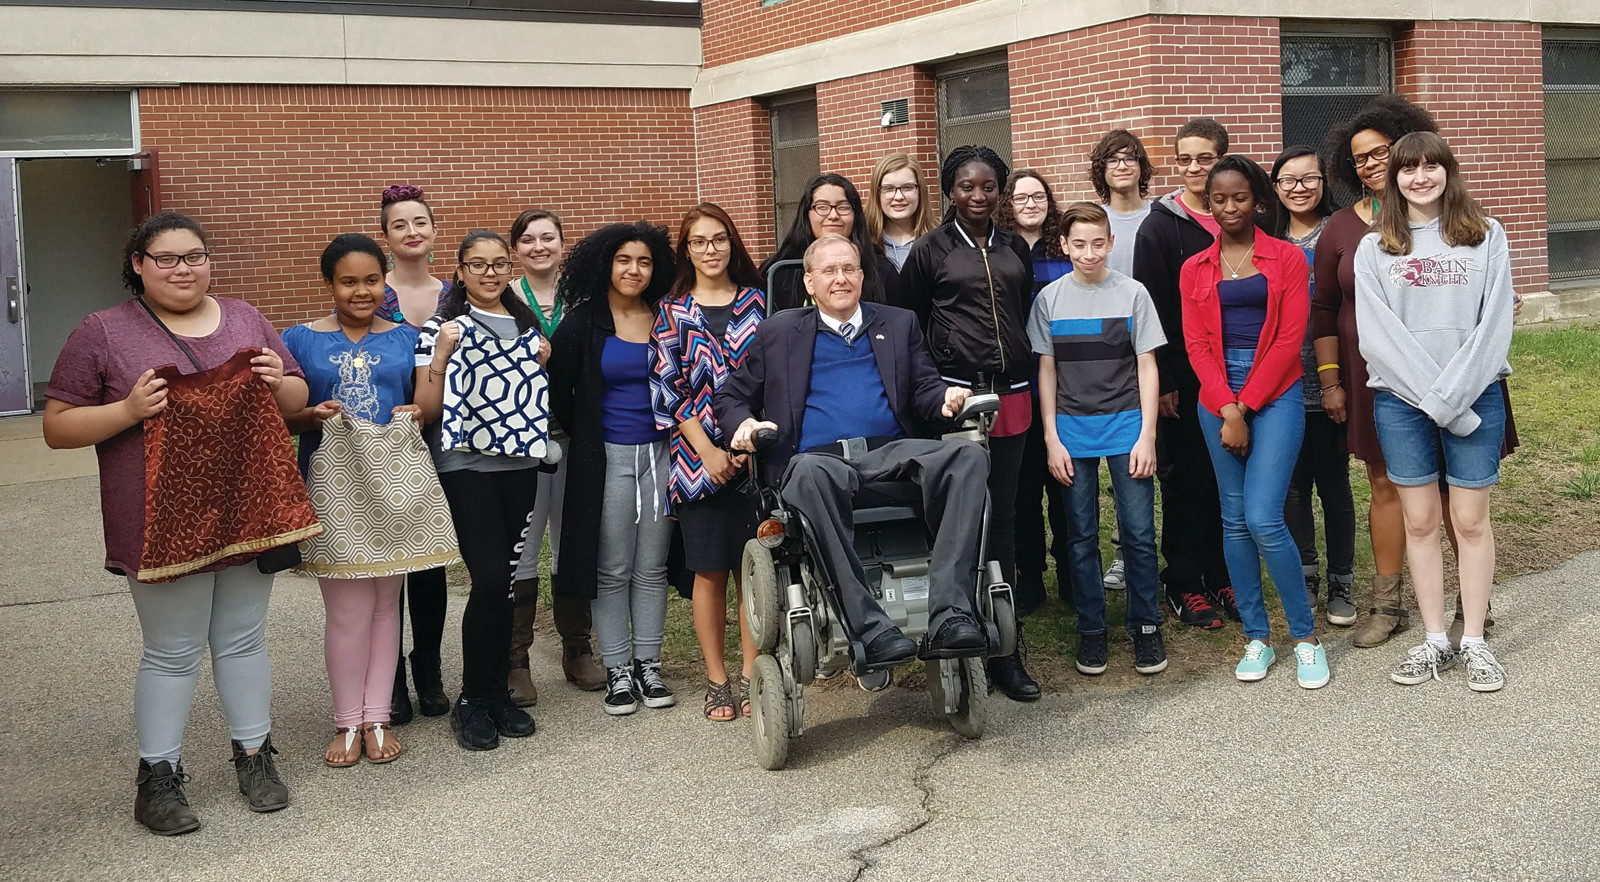 WELCOME TO BAIN : The Youth Empowerment Zone’s student leadership team at the Bain extended day program greeted Congressman Jim Langevin when he visited them at Hugh B. Bain Middle School last week.